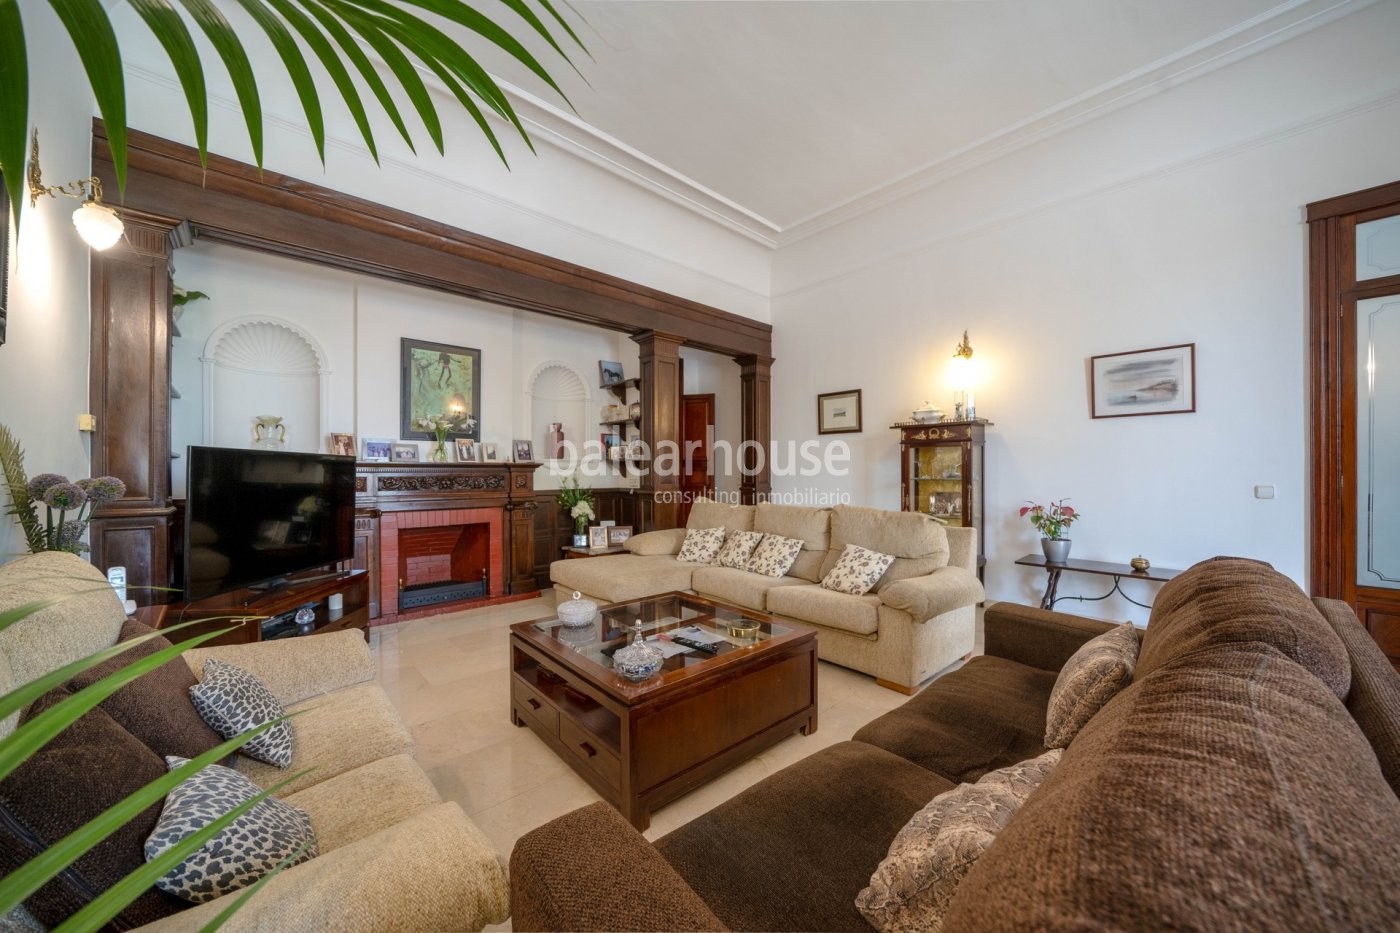 Large stately flat with lots of natural light in an excellent location in the centre of Palma